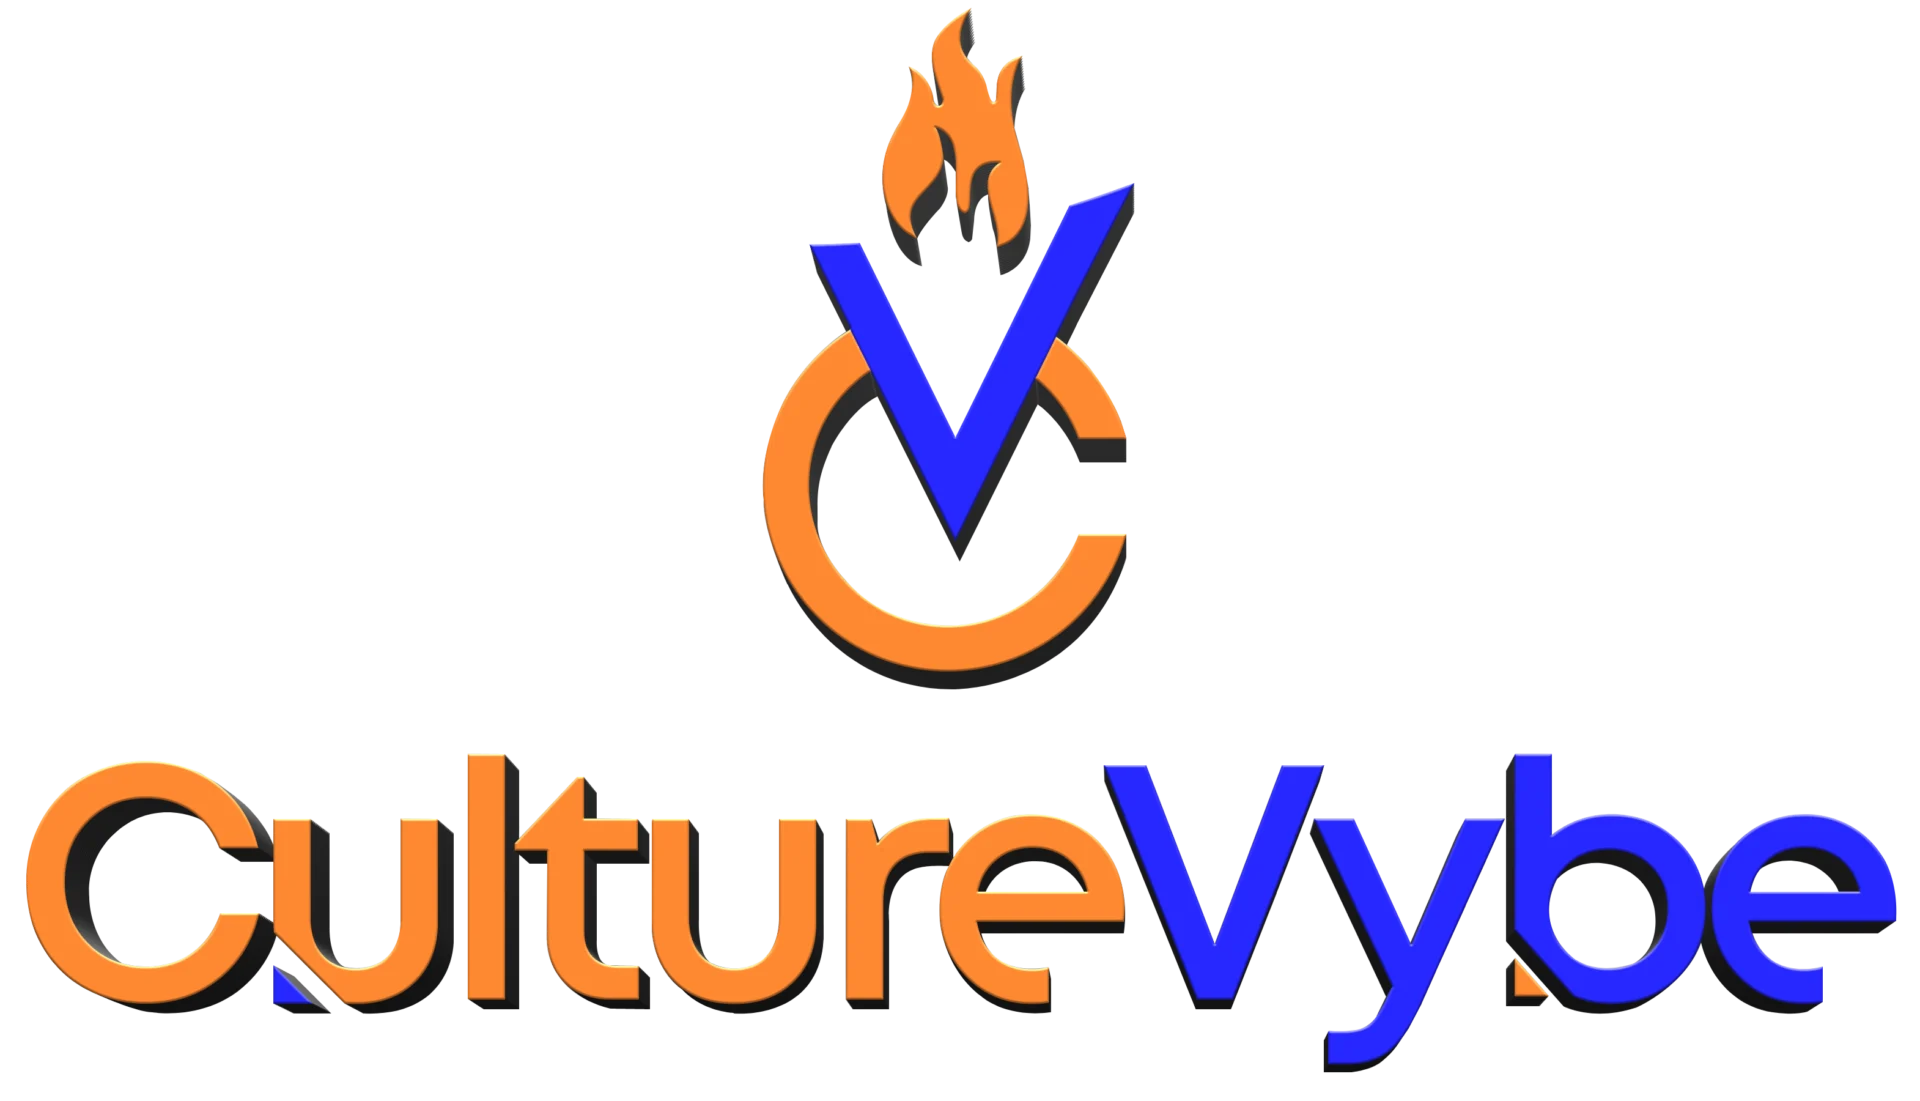 A blue and orange logo is shown on top of the word vulturevvy.